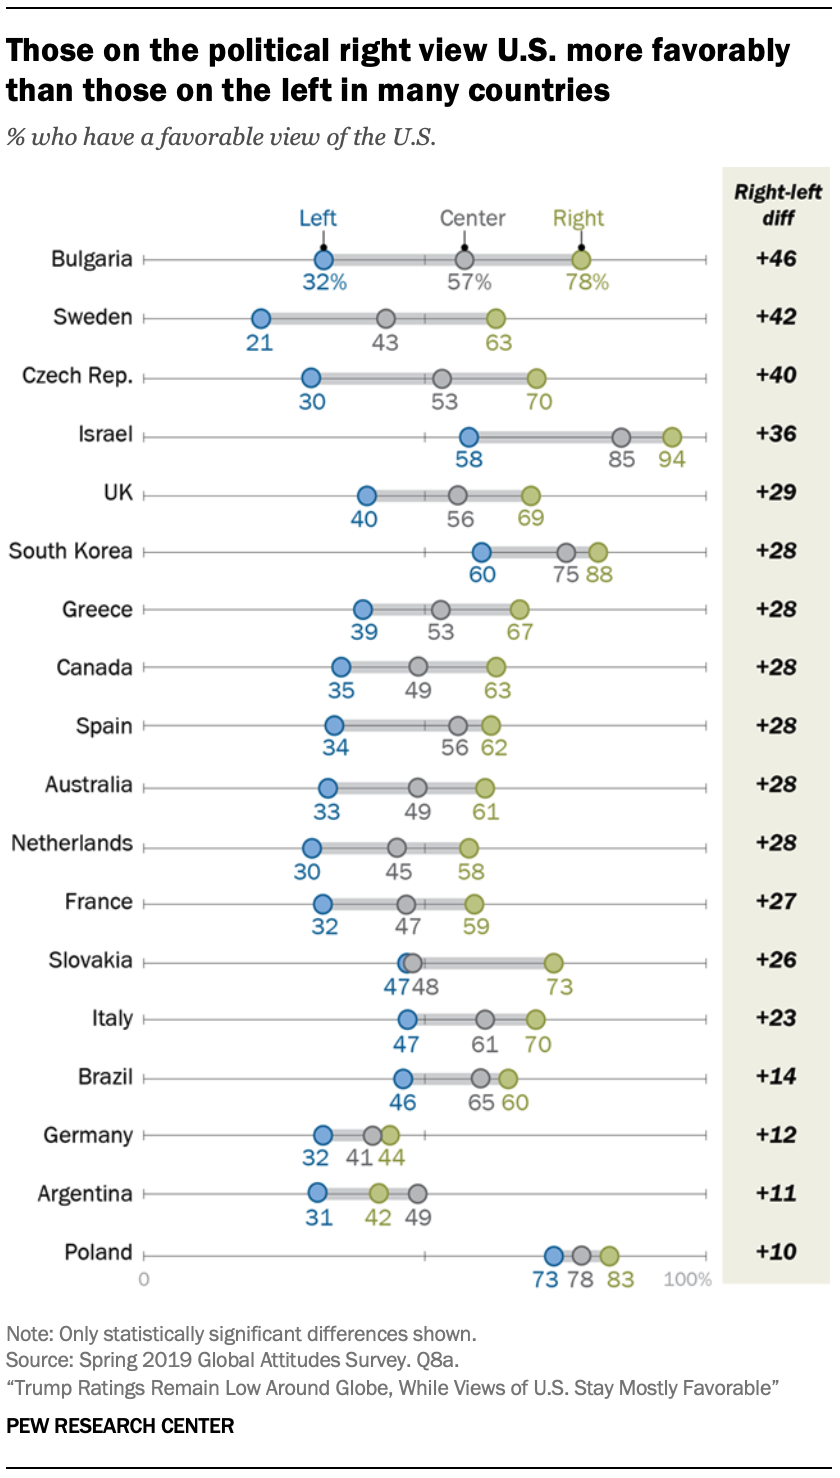 In many countries, younger people view U.S. more positively 